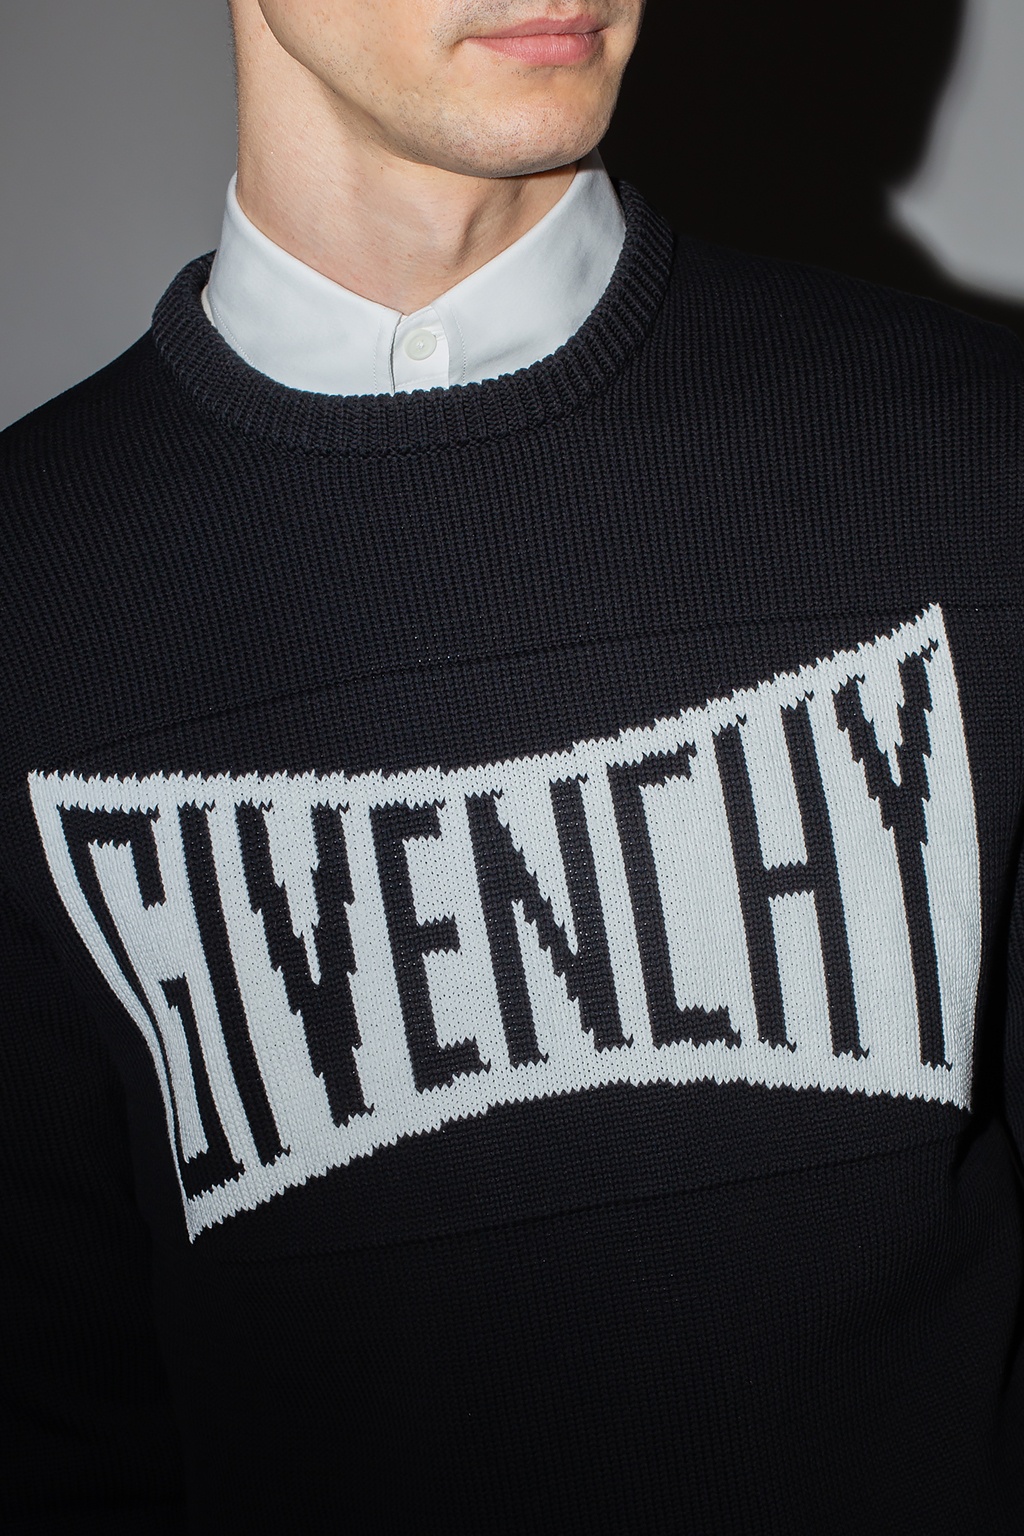 Givenchy Ribbed sweater with logo